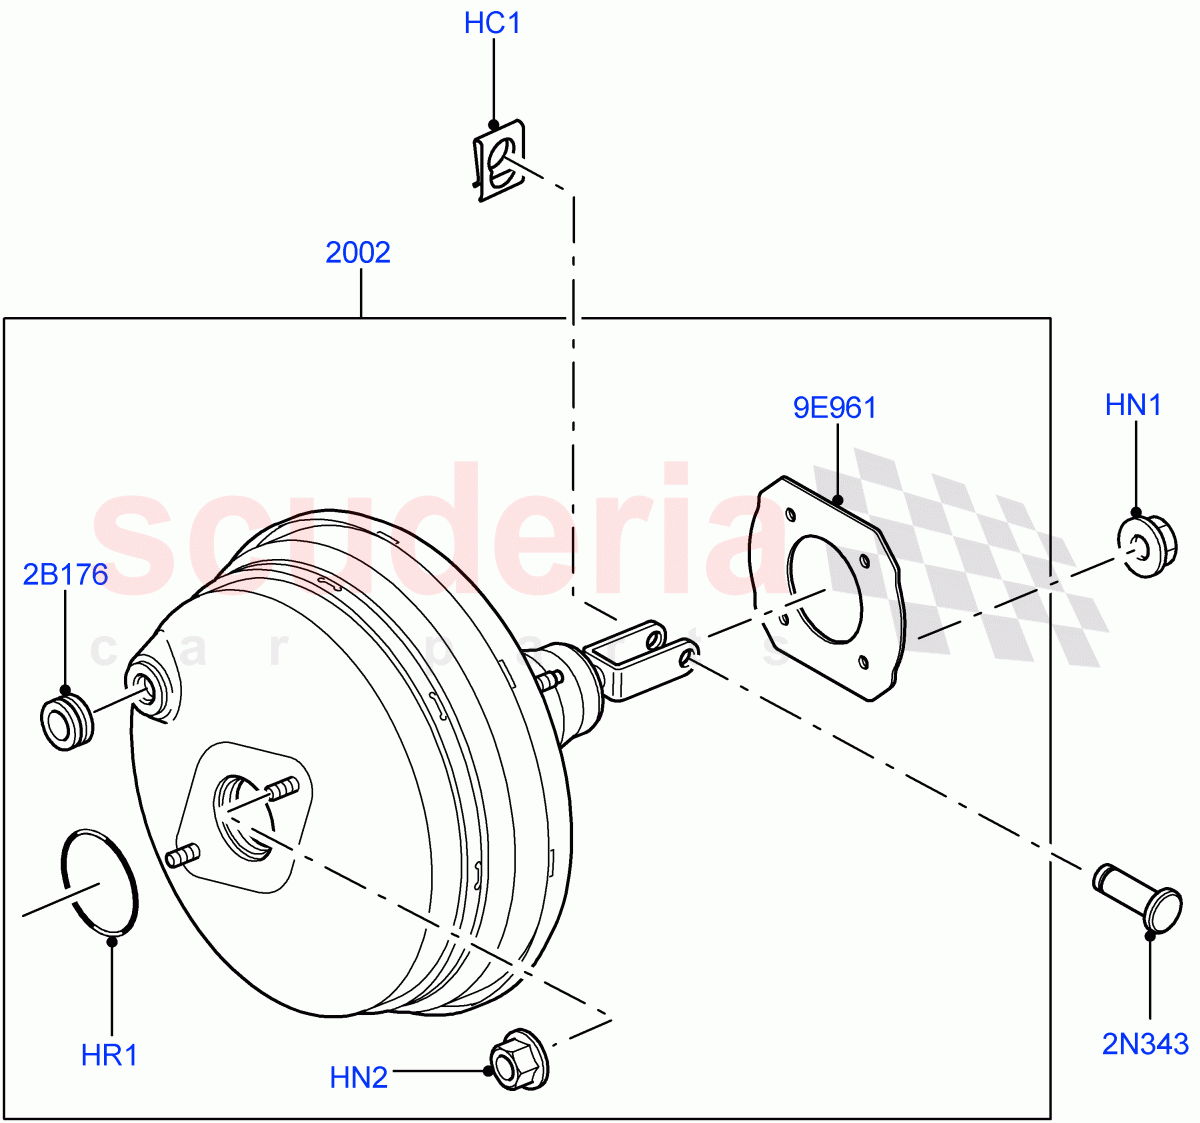 Brake Booster((V)FROMAA000001) of Land Rover Land Rover Discovery 4 (2010-2016) [3.0 Diesel 24V DOHC TC]